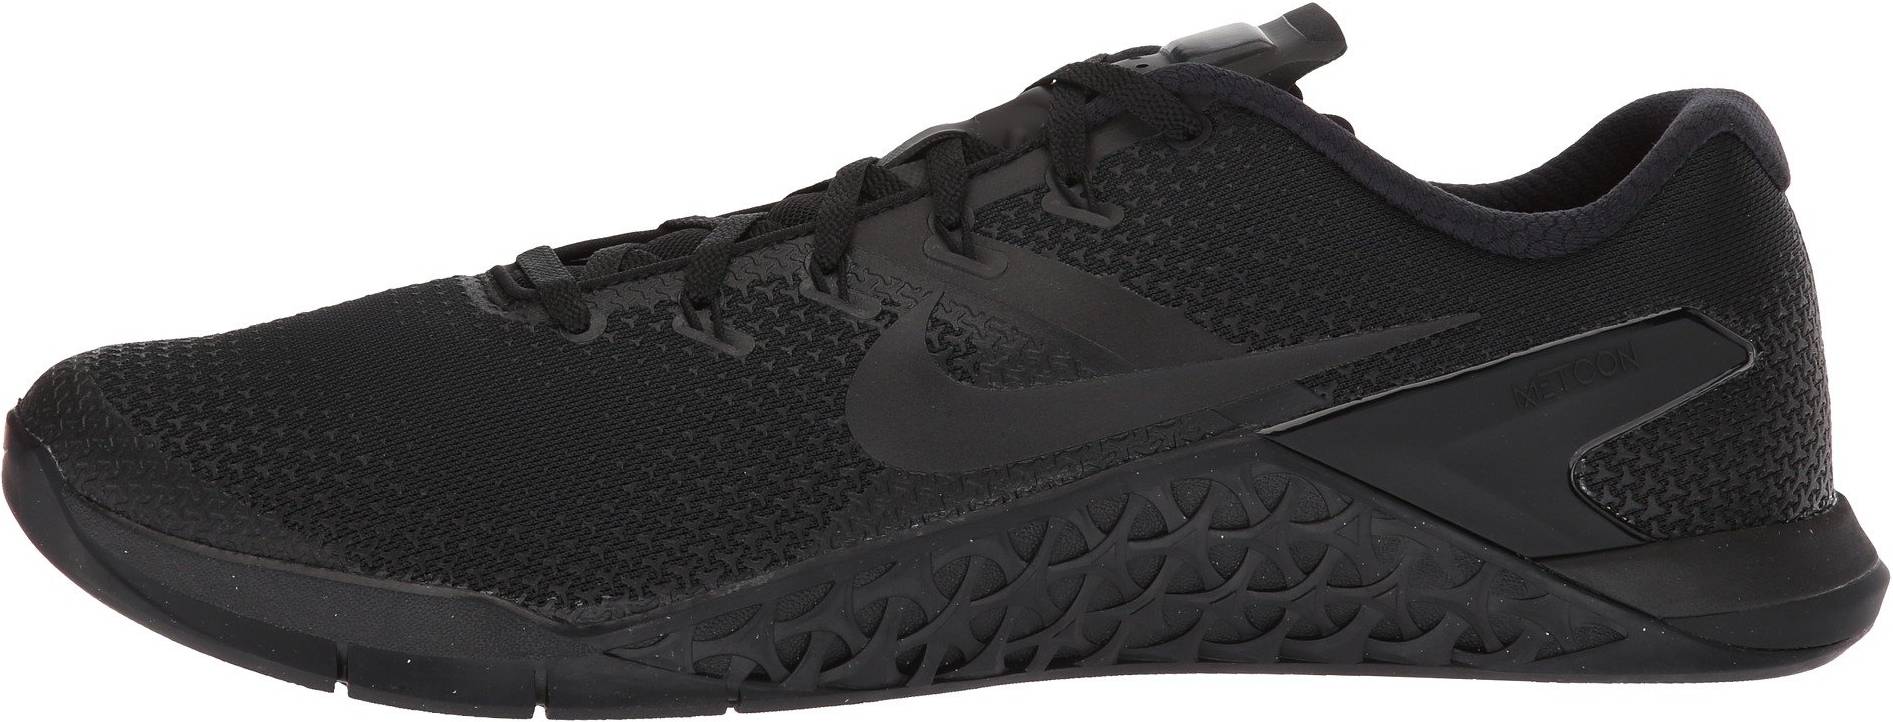 Only $59 + Review of Nike Metcon 4 